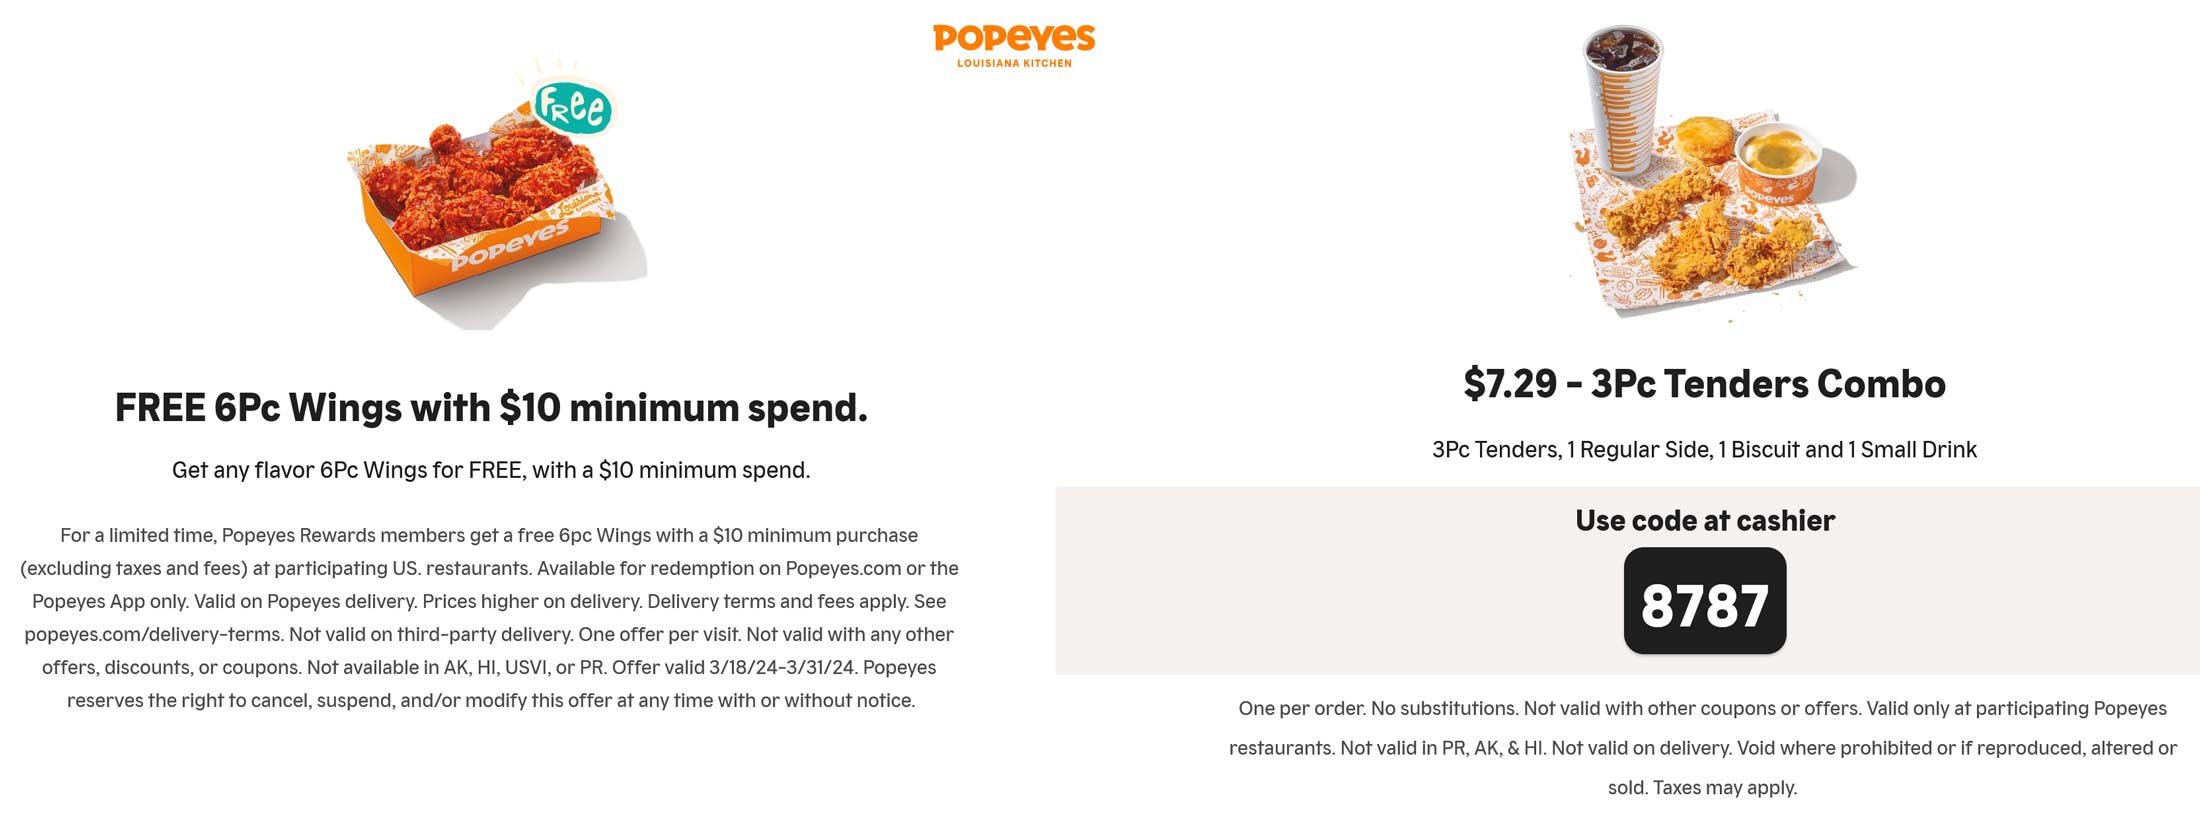 Popeyes restaurants Coupon  Free 6pc wings on $10 & more at Popeyes restaurants #popeyes 